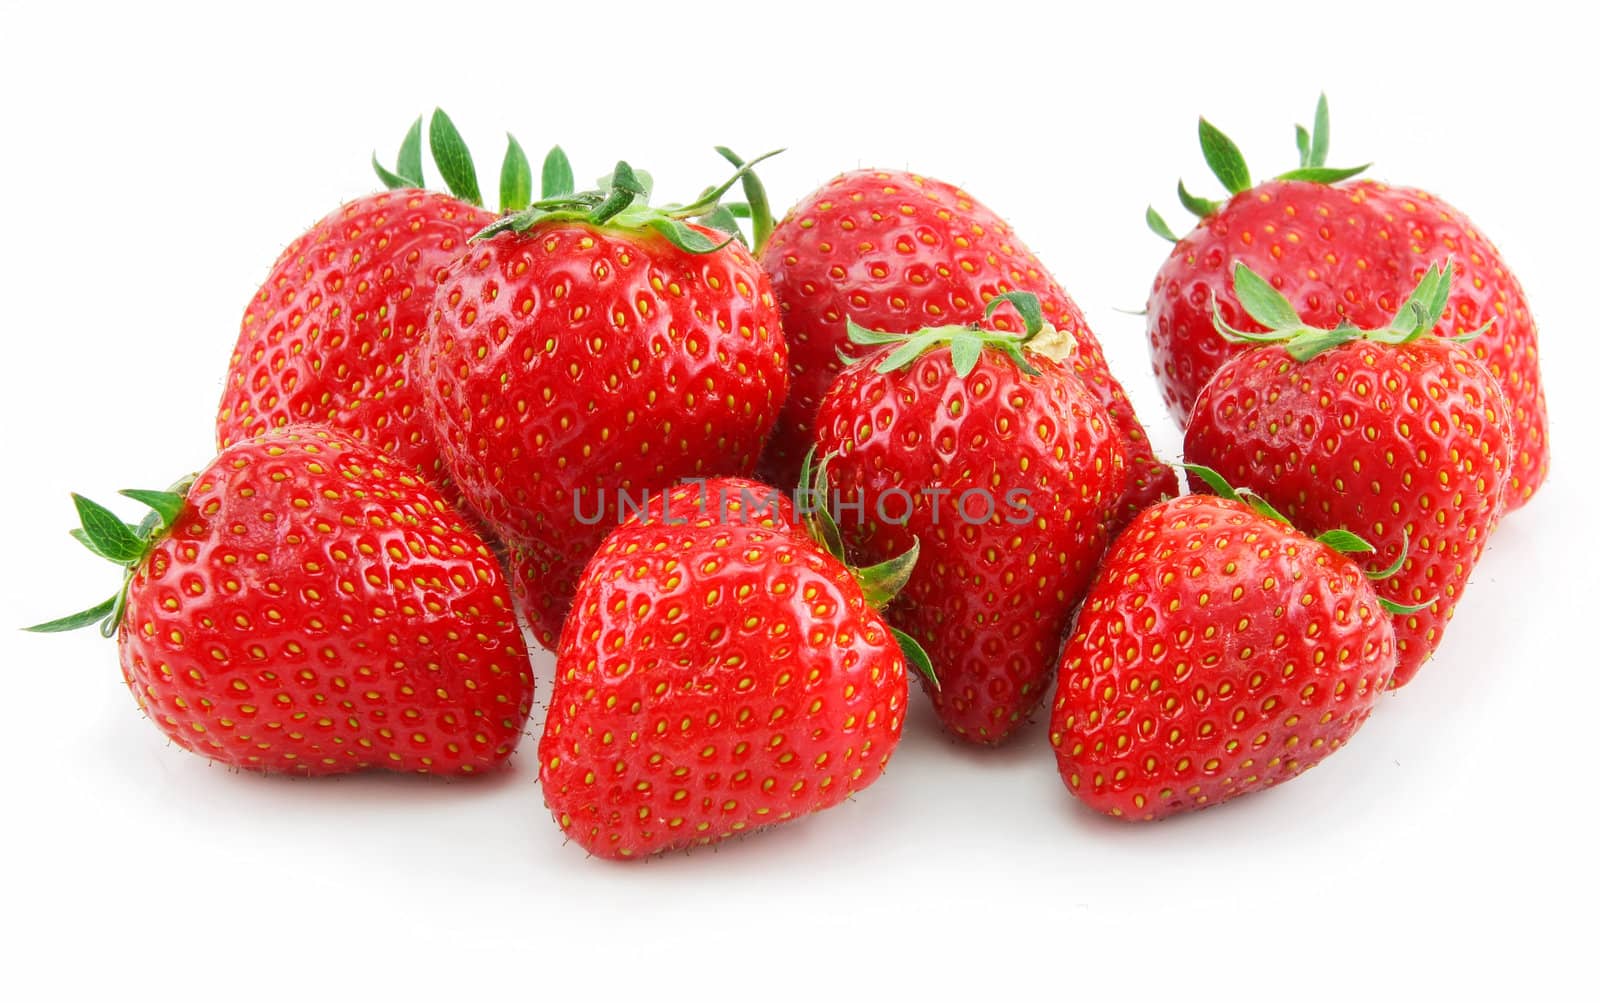 Ripe Strawberries Isolated on White by alphacell